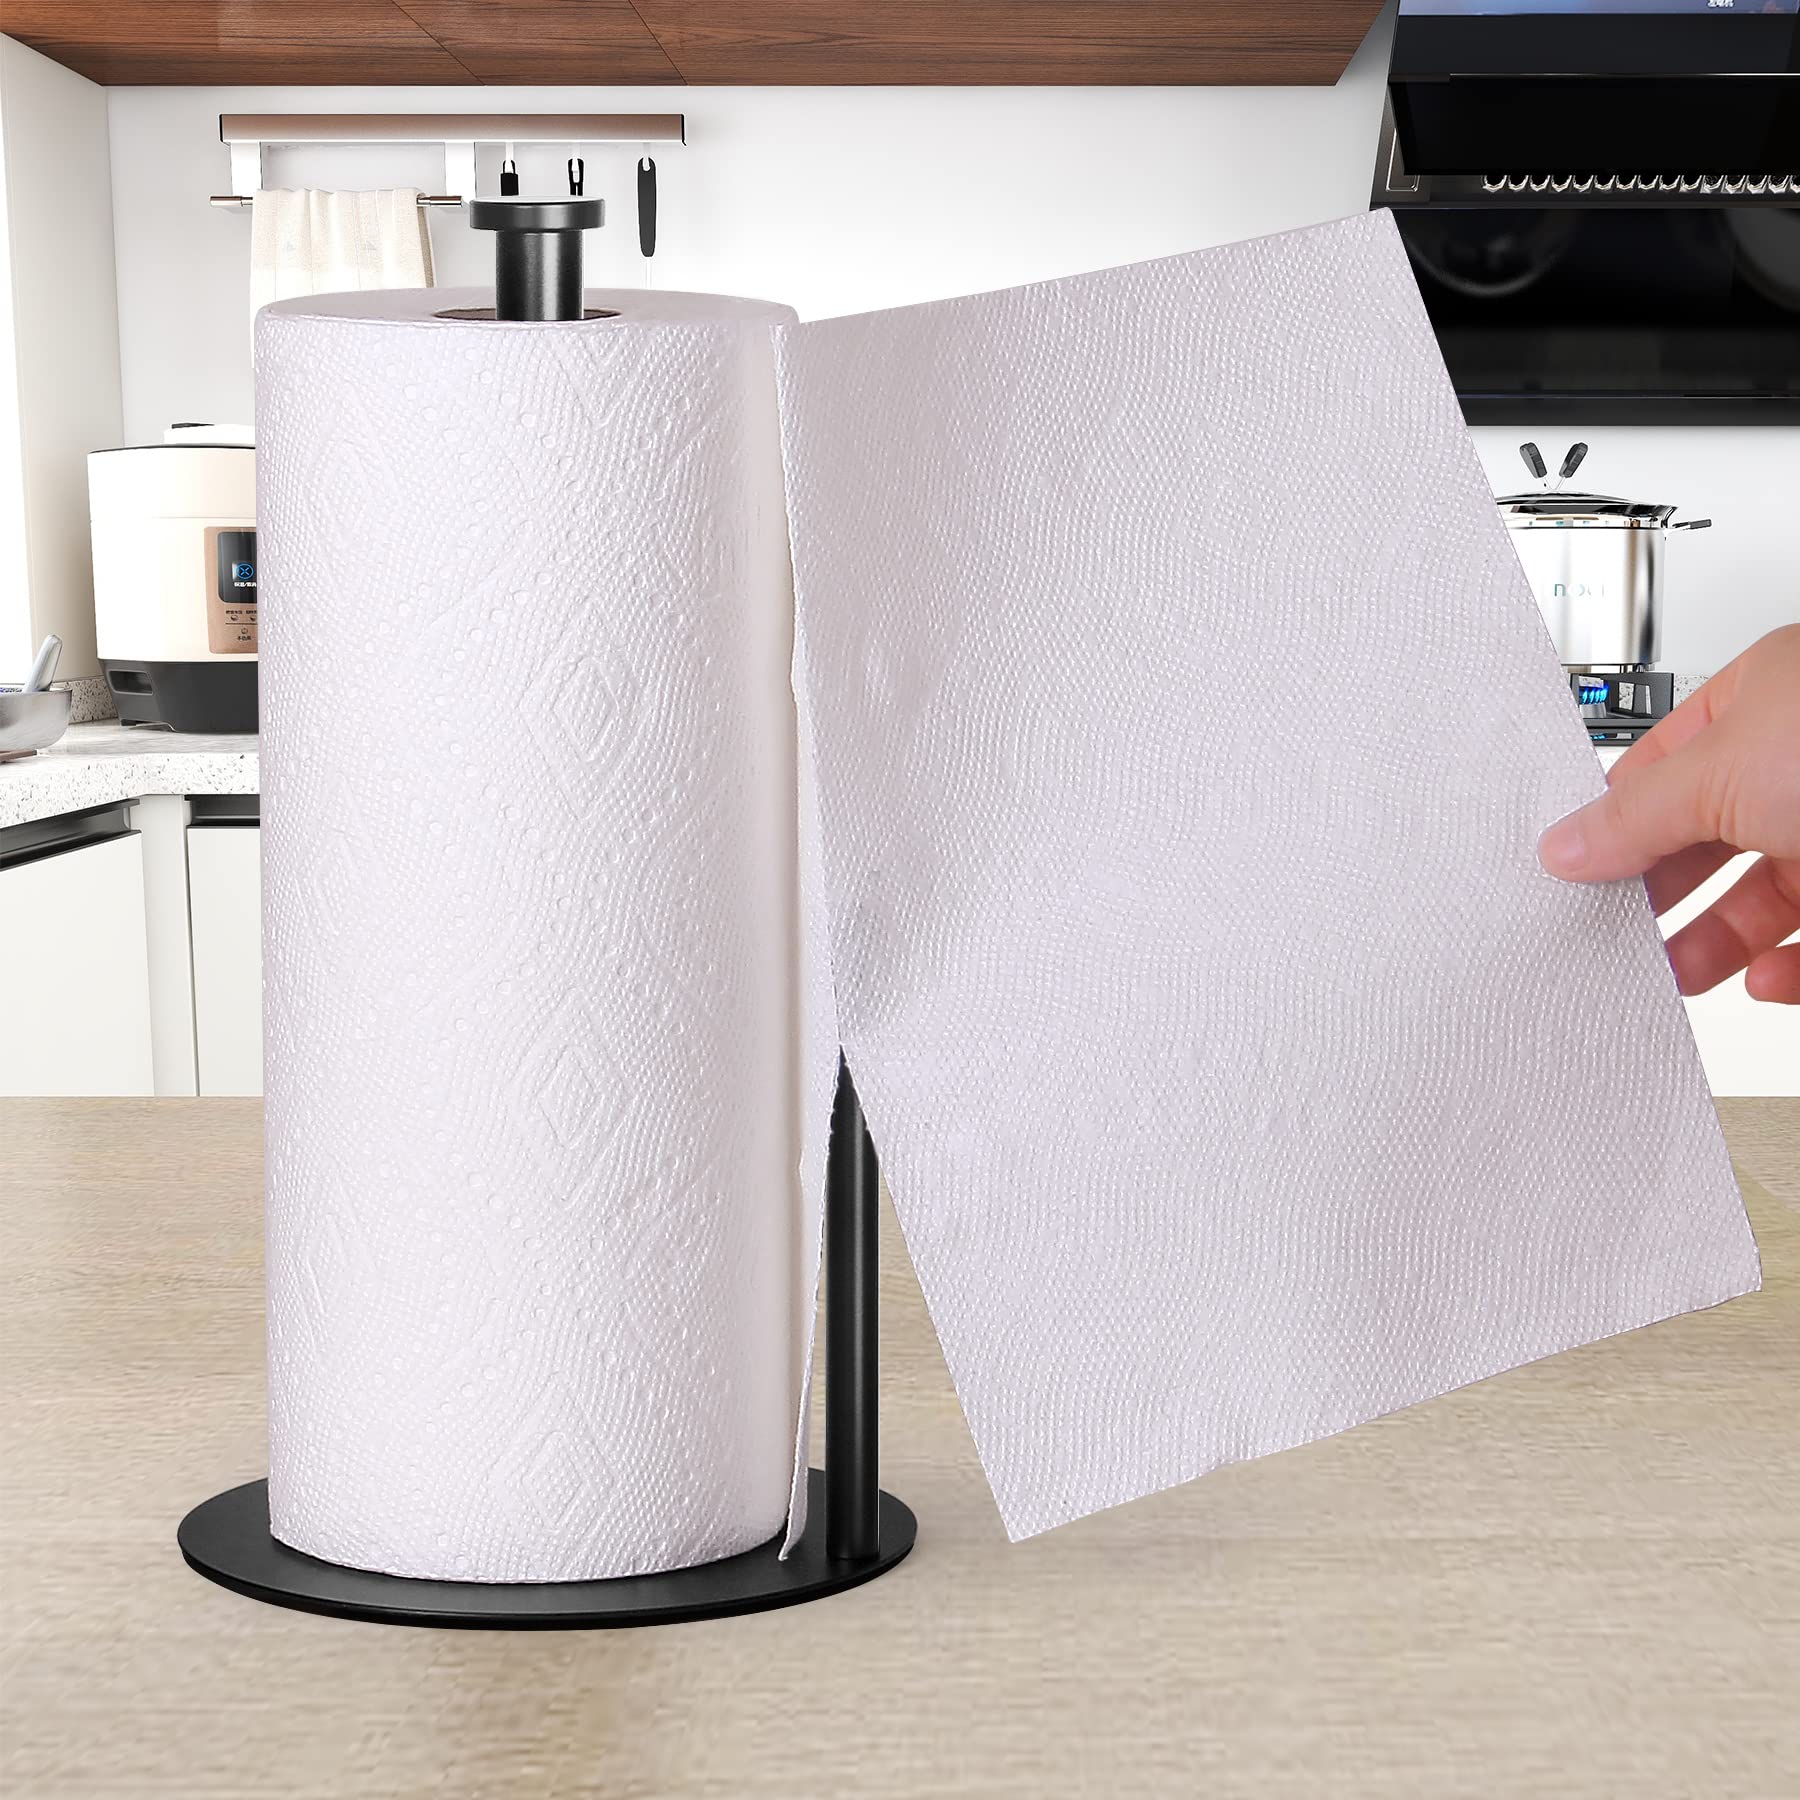 Paper Towel Holder Countertop,Silver Paper Towel Holder Stand for Kitchen  and Bathroom,Stainless Steel Paper Towel Holders for Standard Rolls